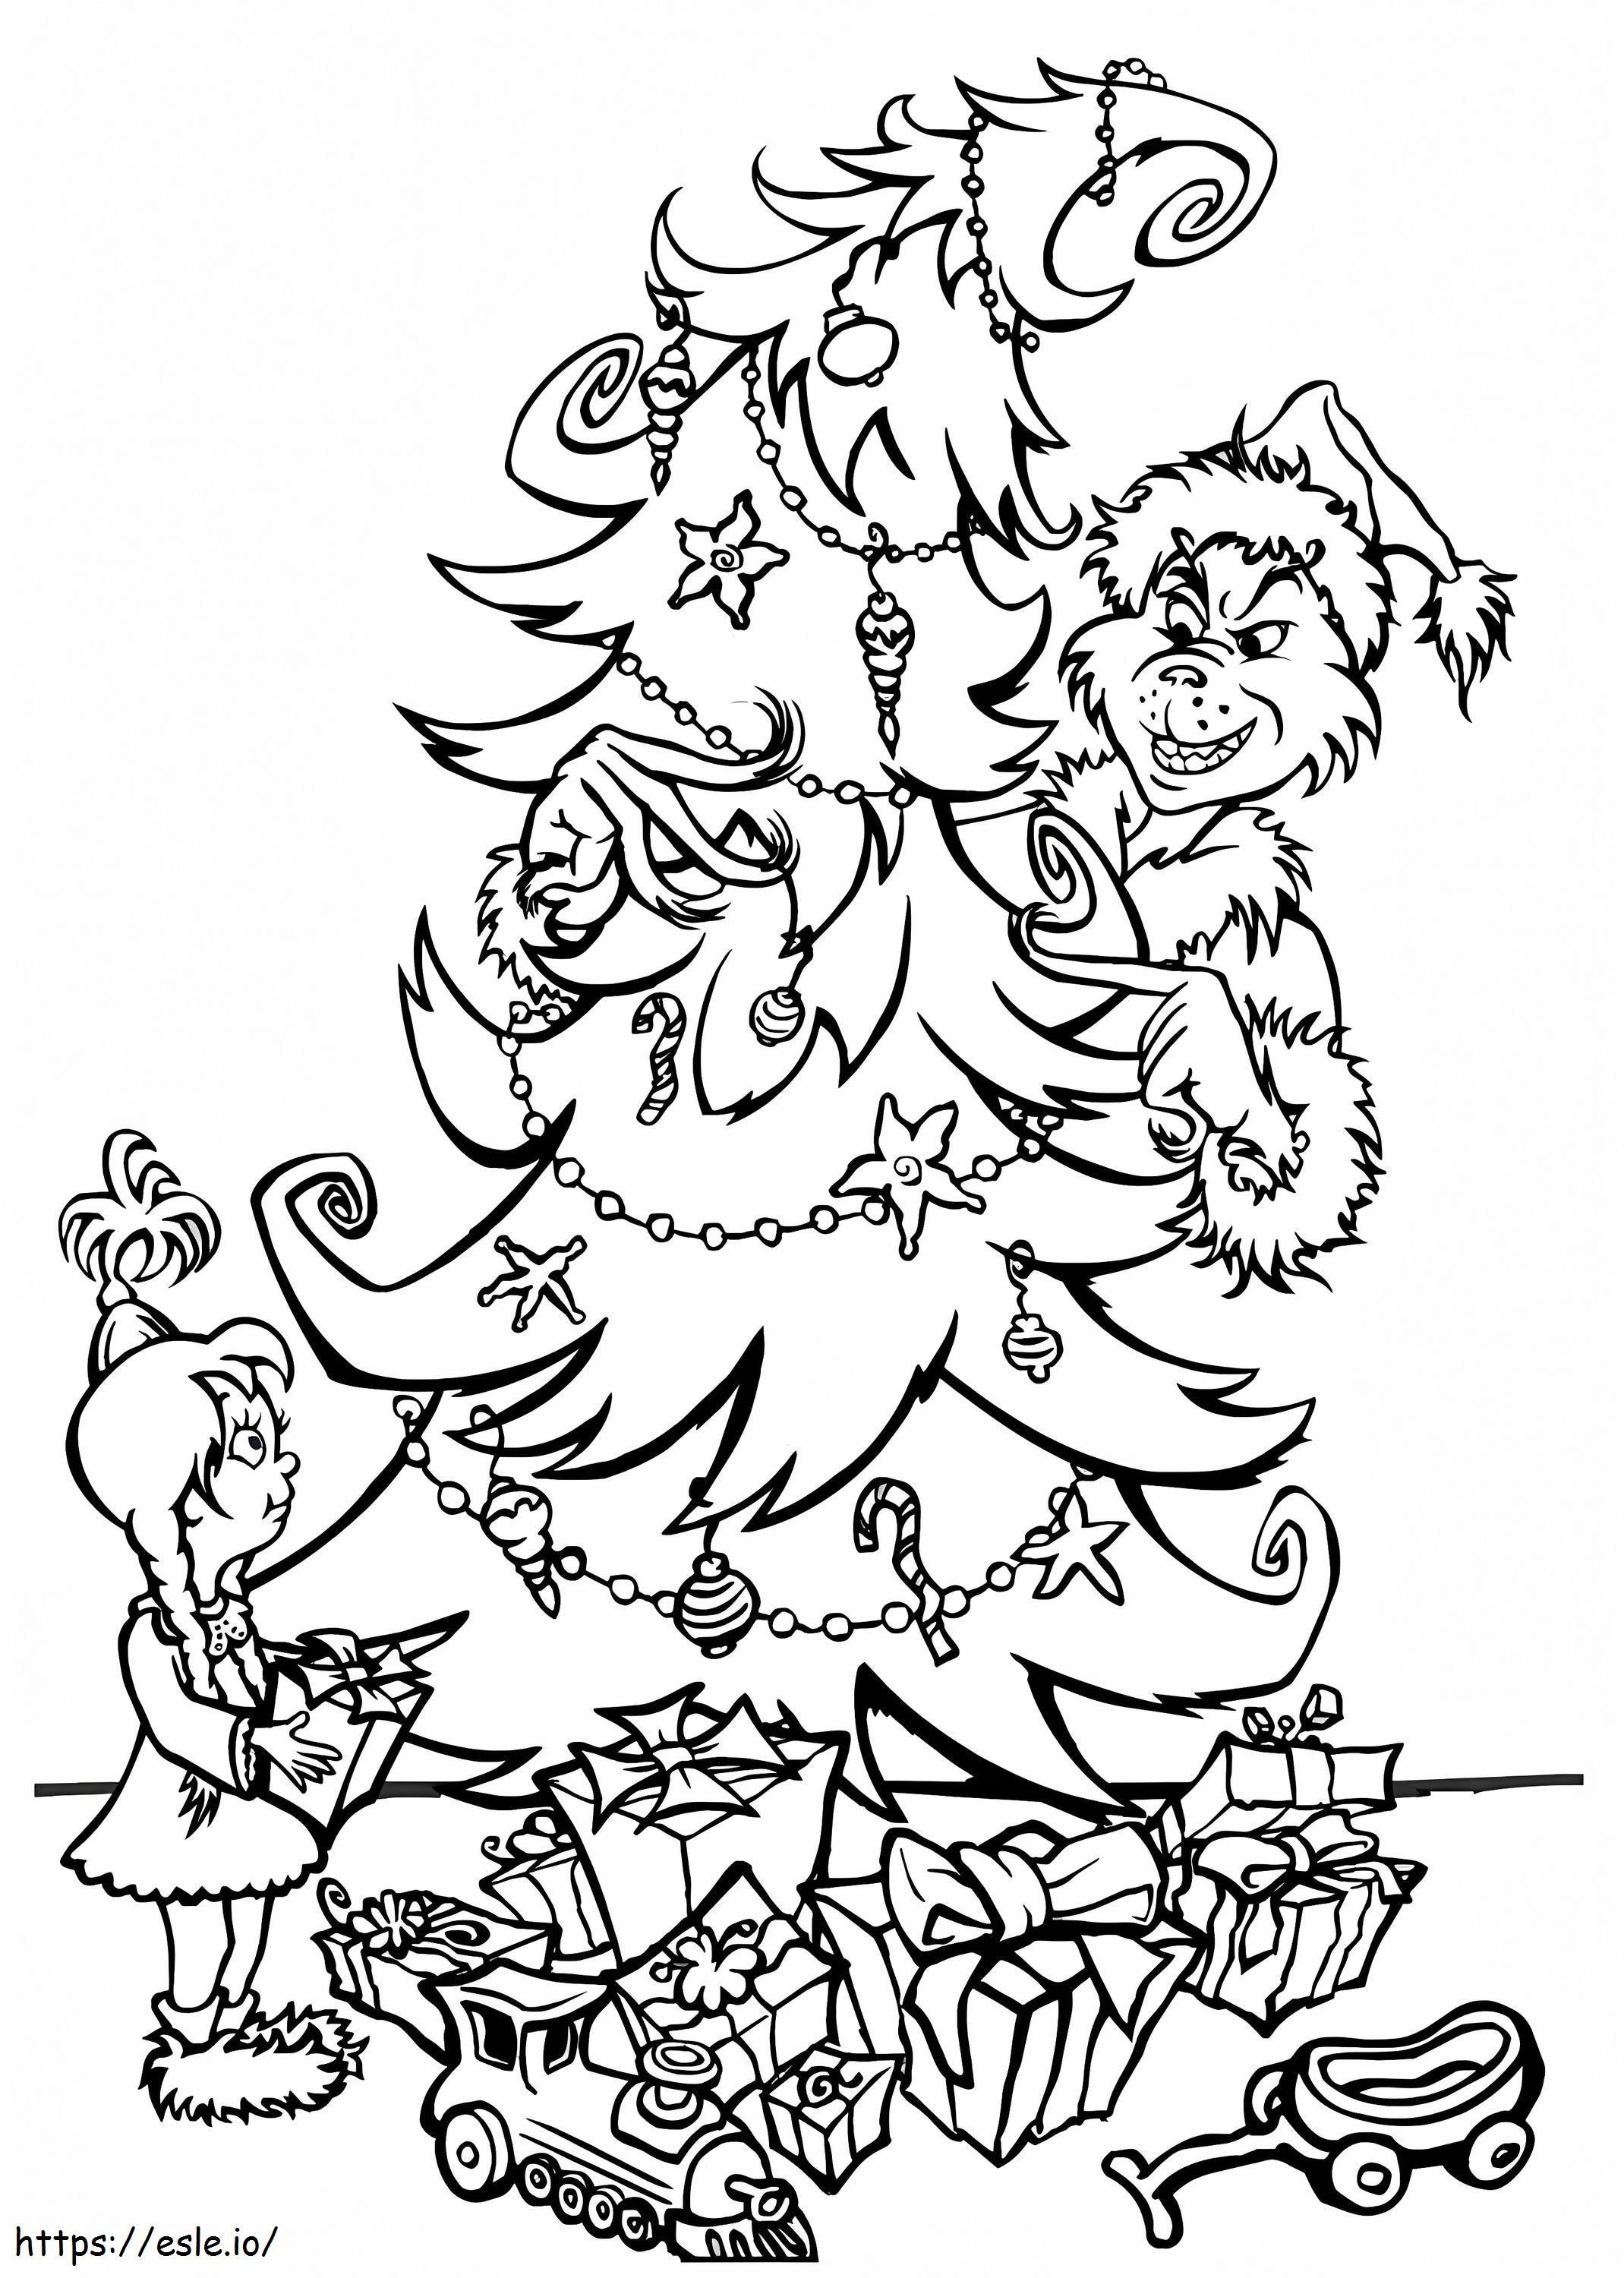 1571887077 C517F733478108F0C385669A4Bb1D566 Grinch Christmas Tree Christmas Tree coloring page